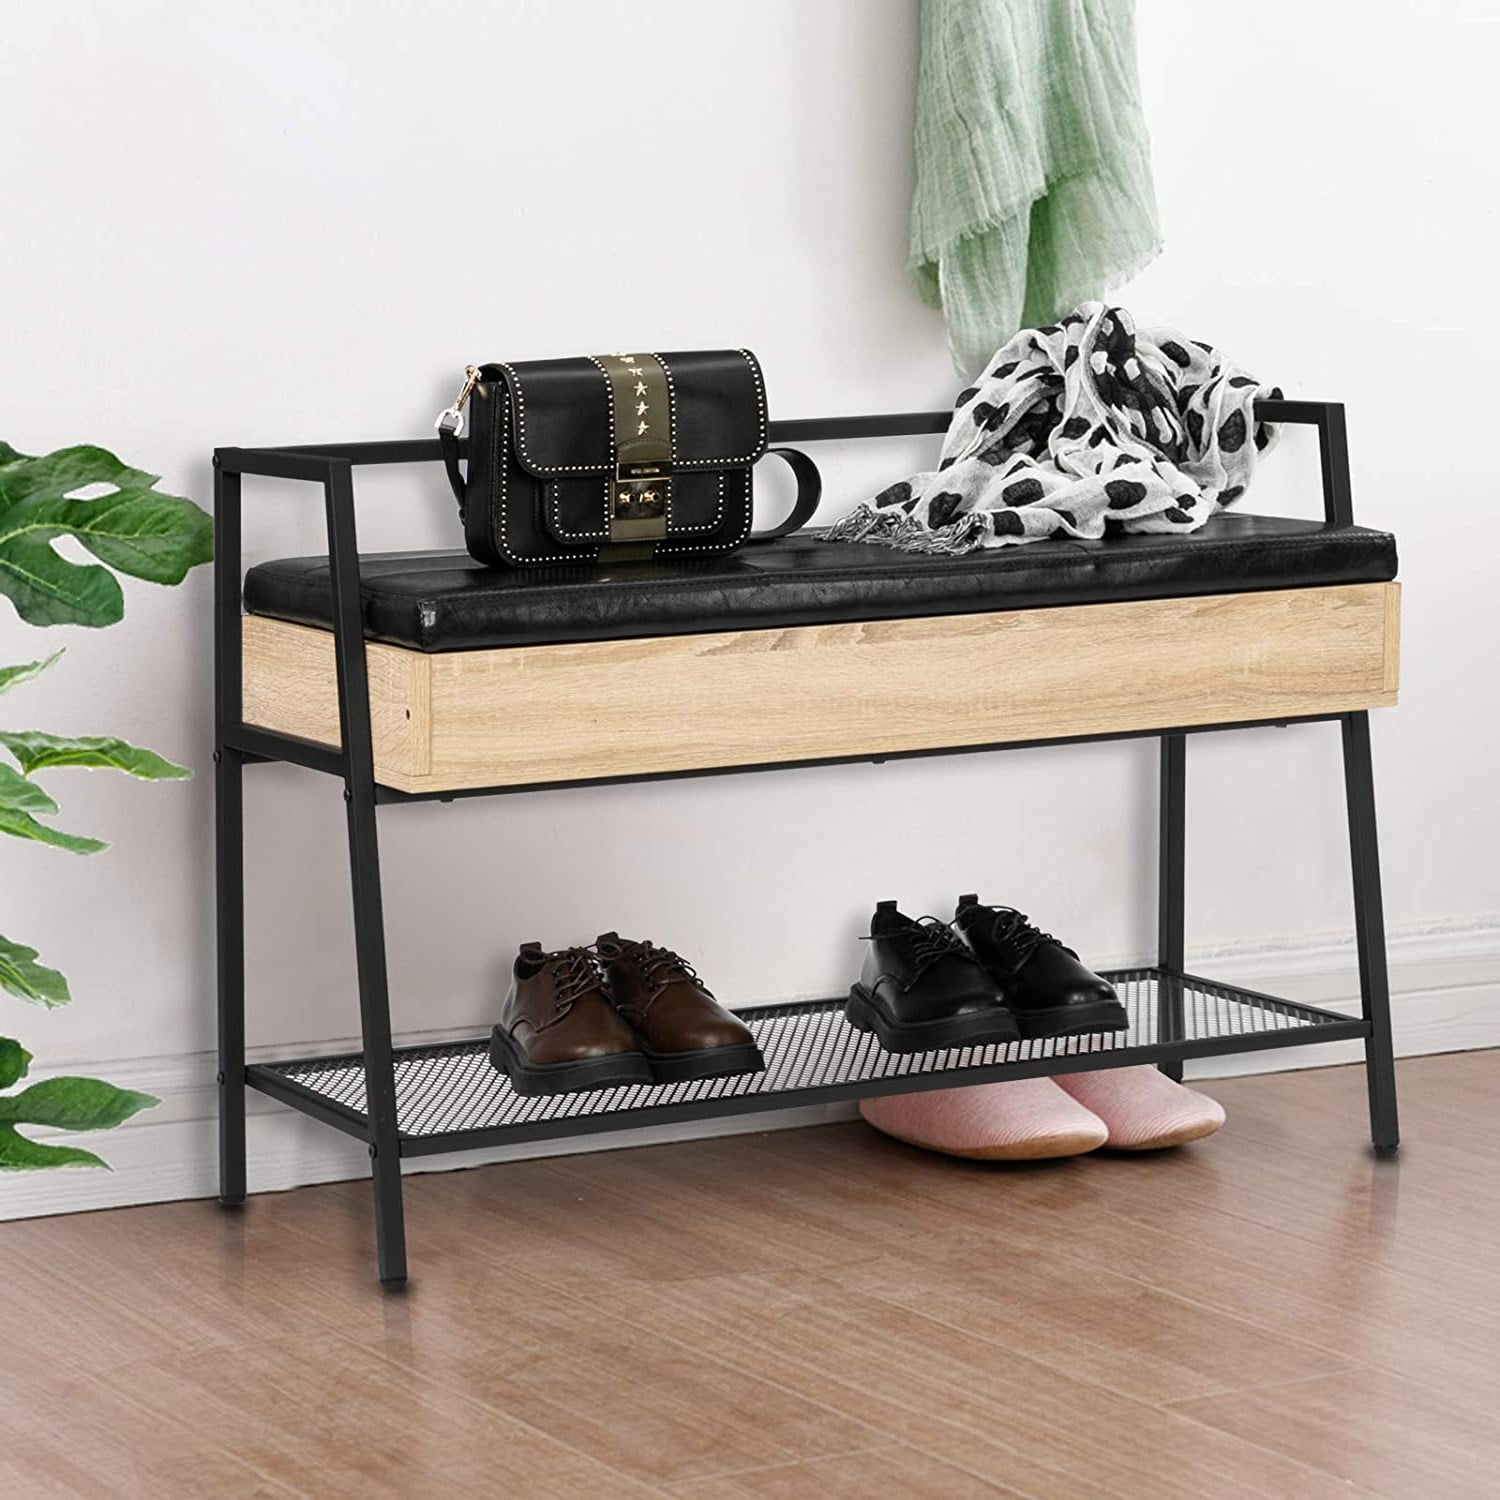 3 Cube Organizer Storage Bench Espresso Stylish With Seating For Up To 2 Adults 